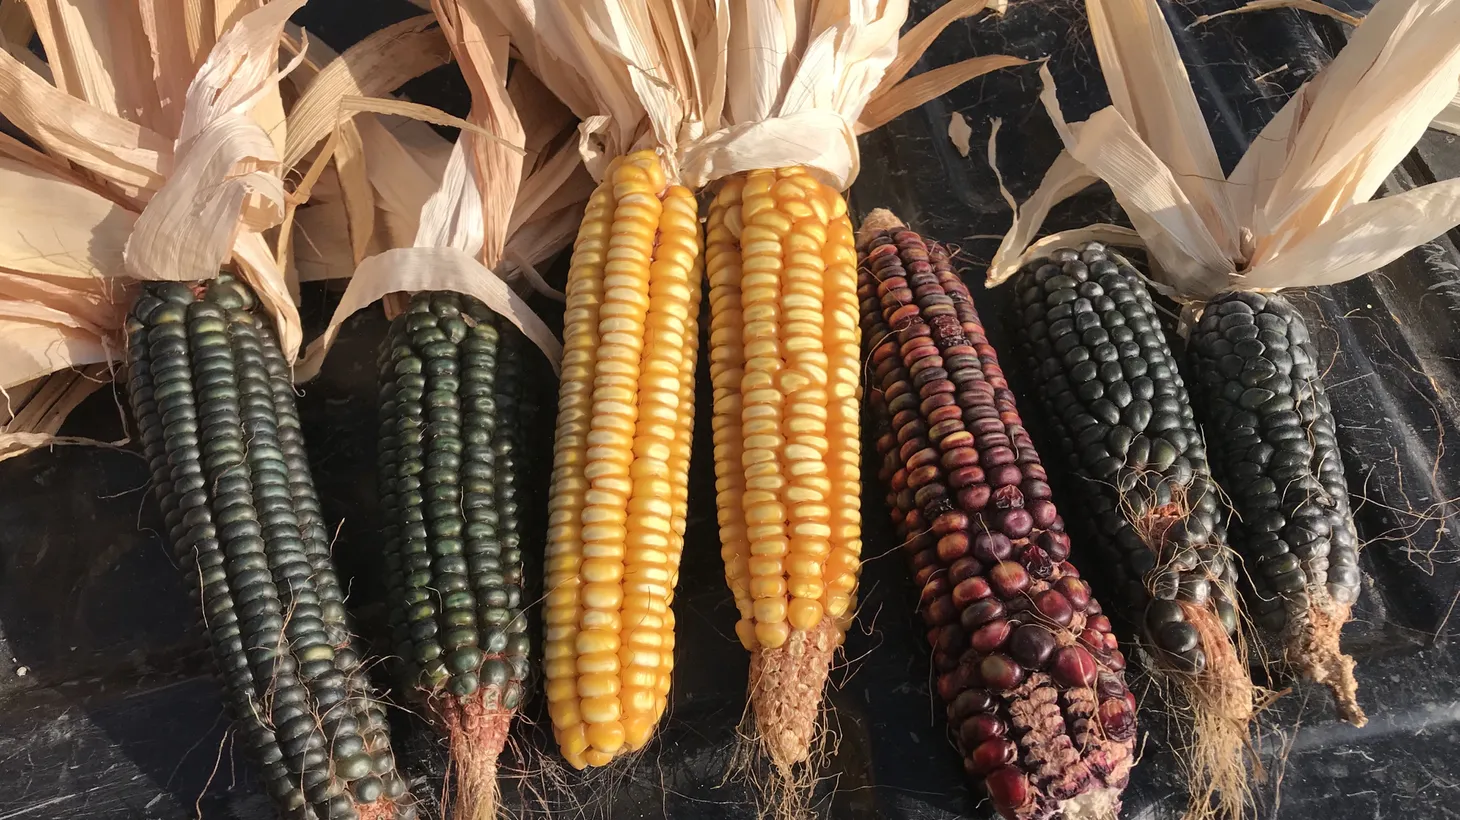 From left to right: Tehachapi Grain Project is growing Oaxacan green dent, Nothstine dent, painted mountain, and Oaxacan blue dent varieties of corn.